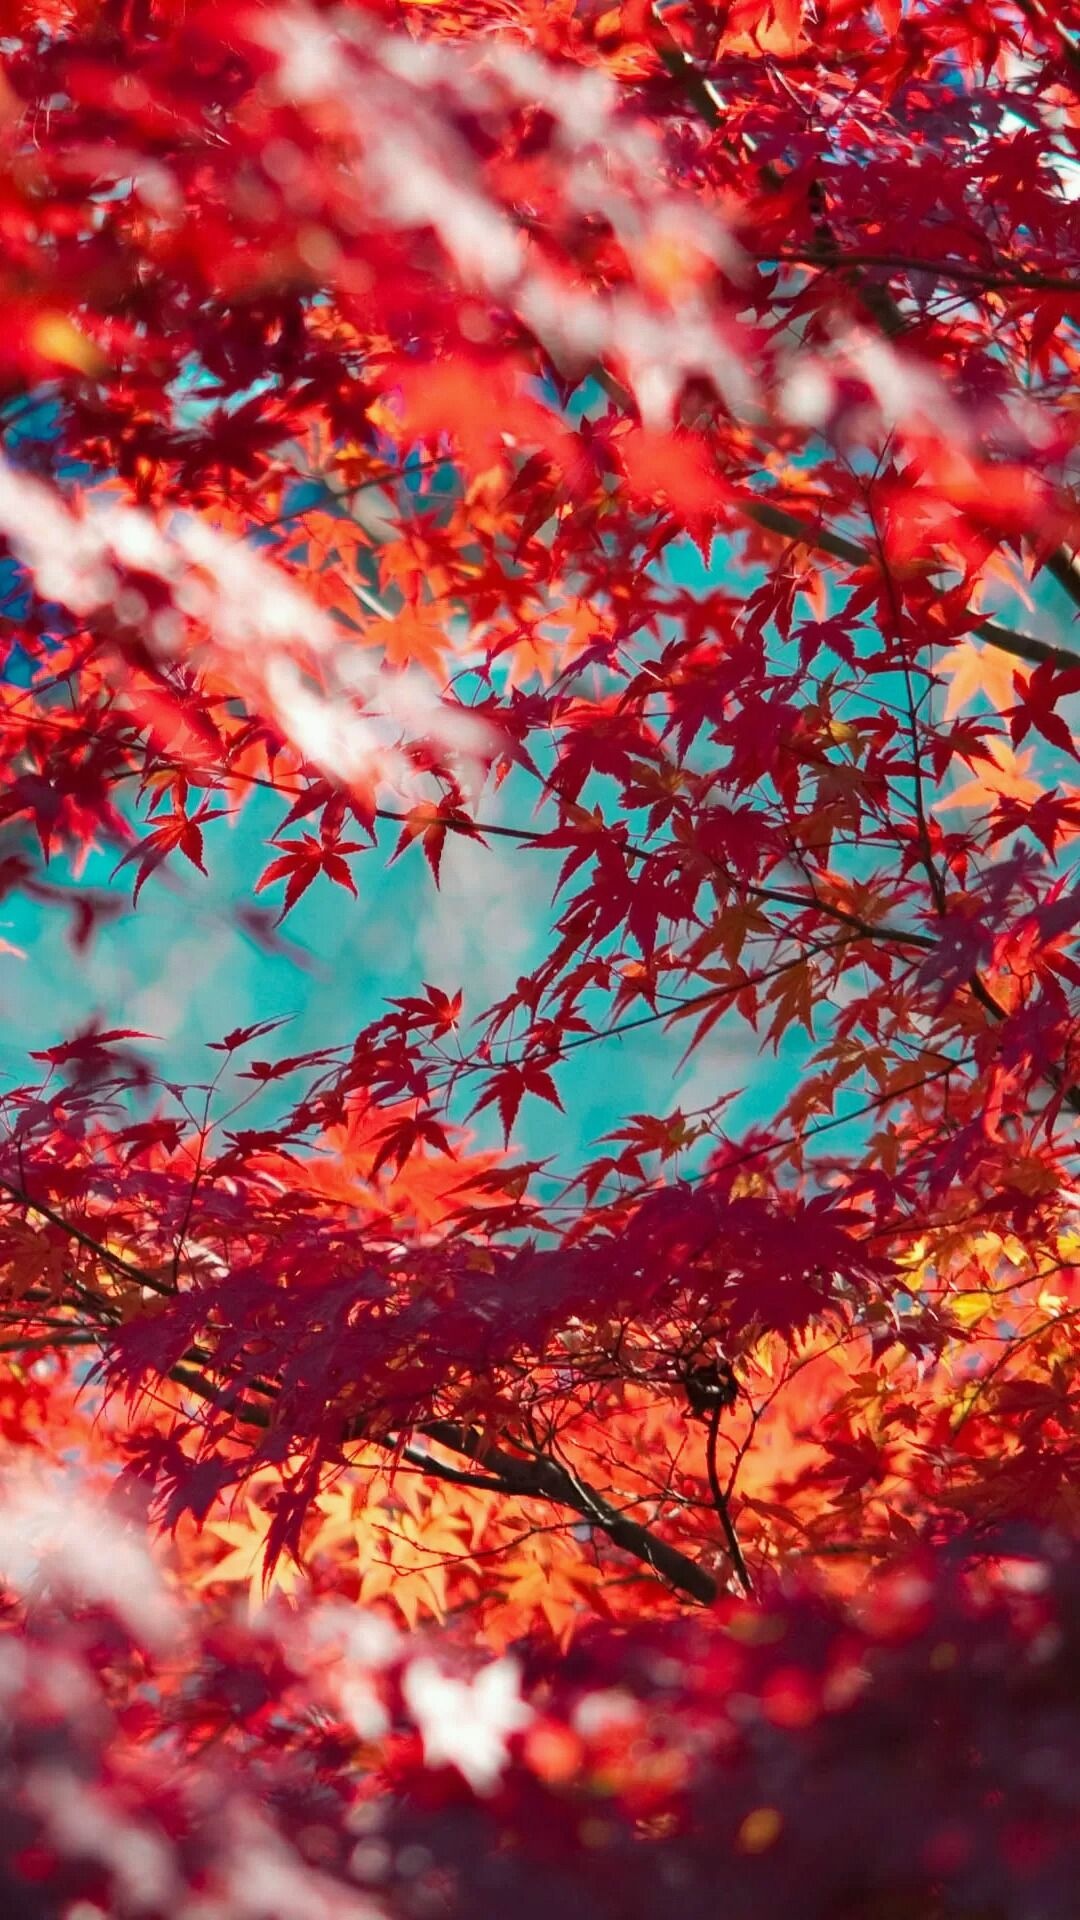 Red maple leaves, Tree wallpaper, Fall inspiration, iPhone background, 1080x1920 Full HD Handy